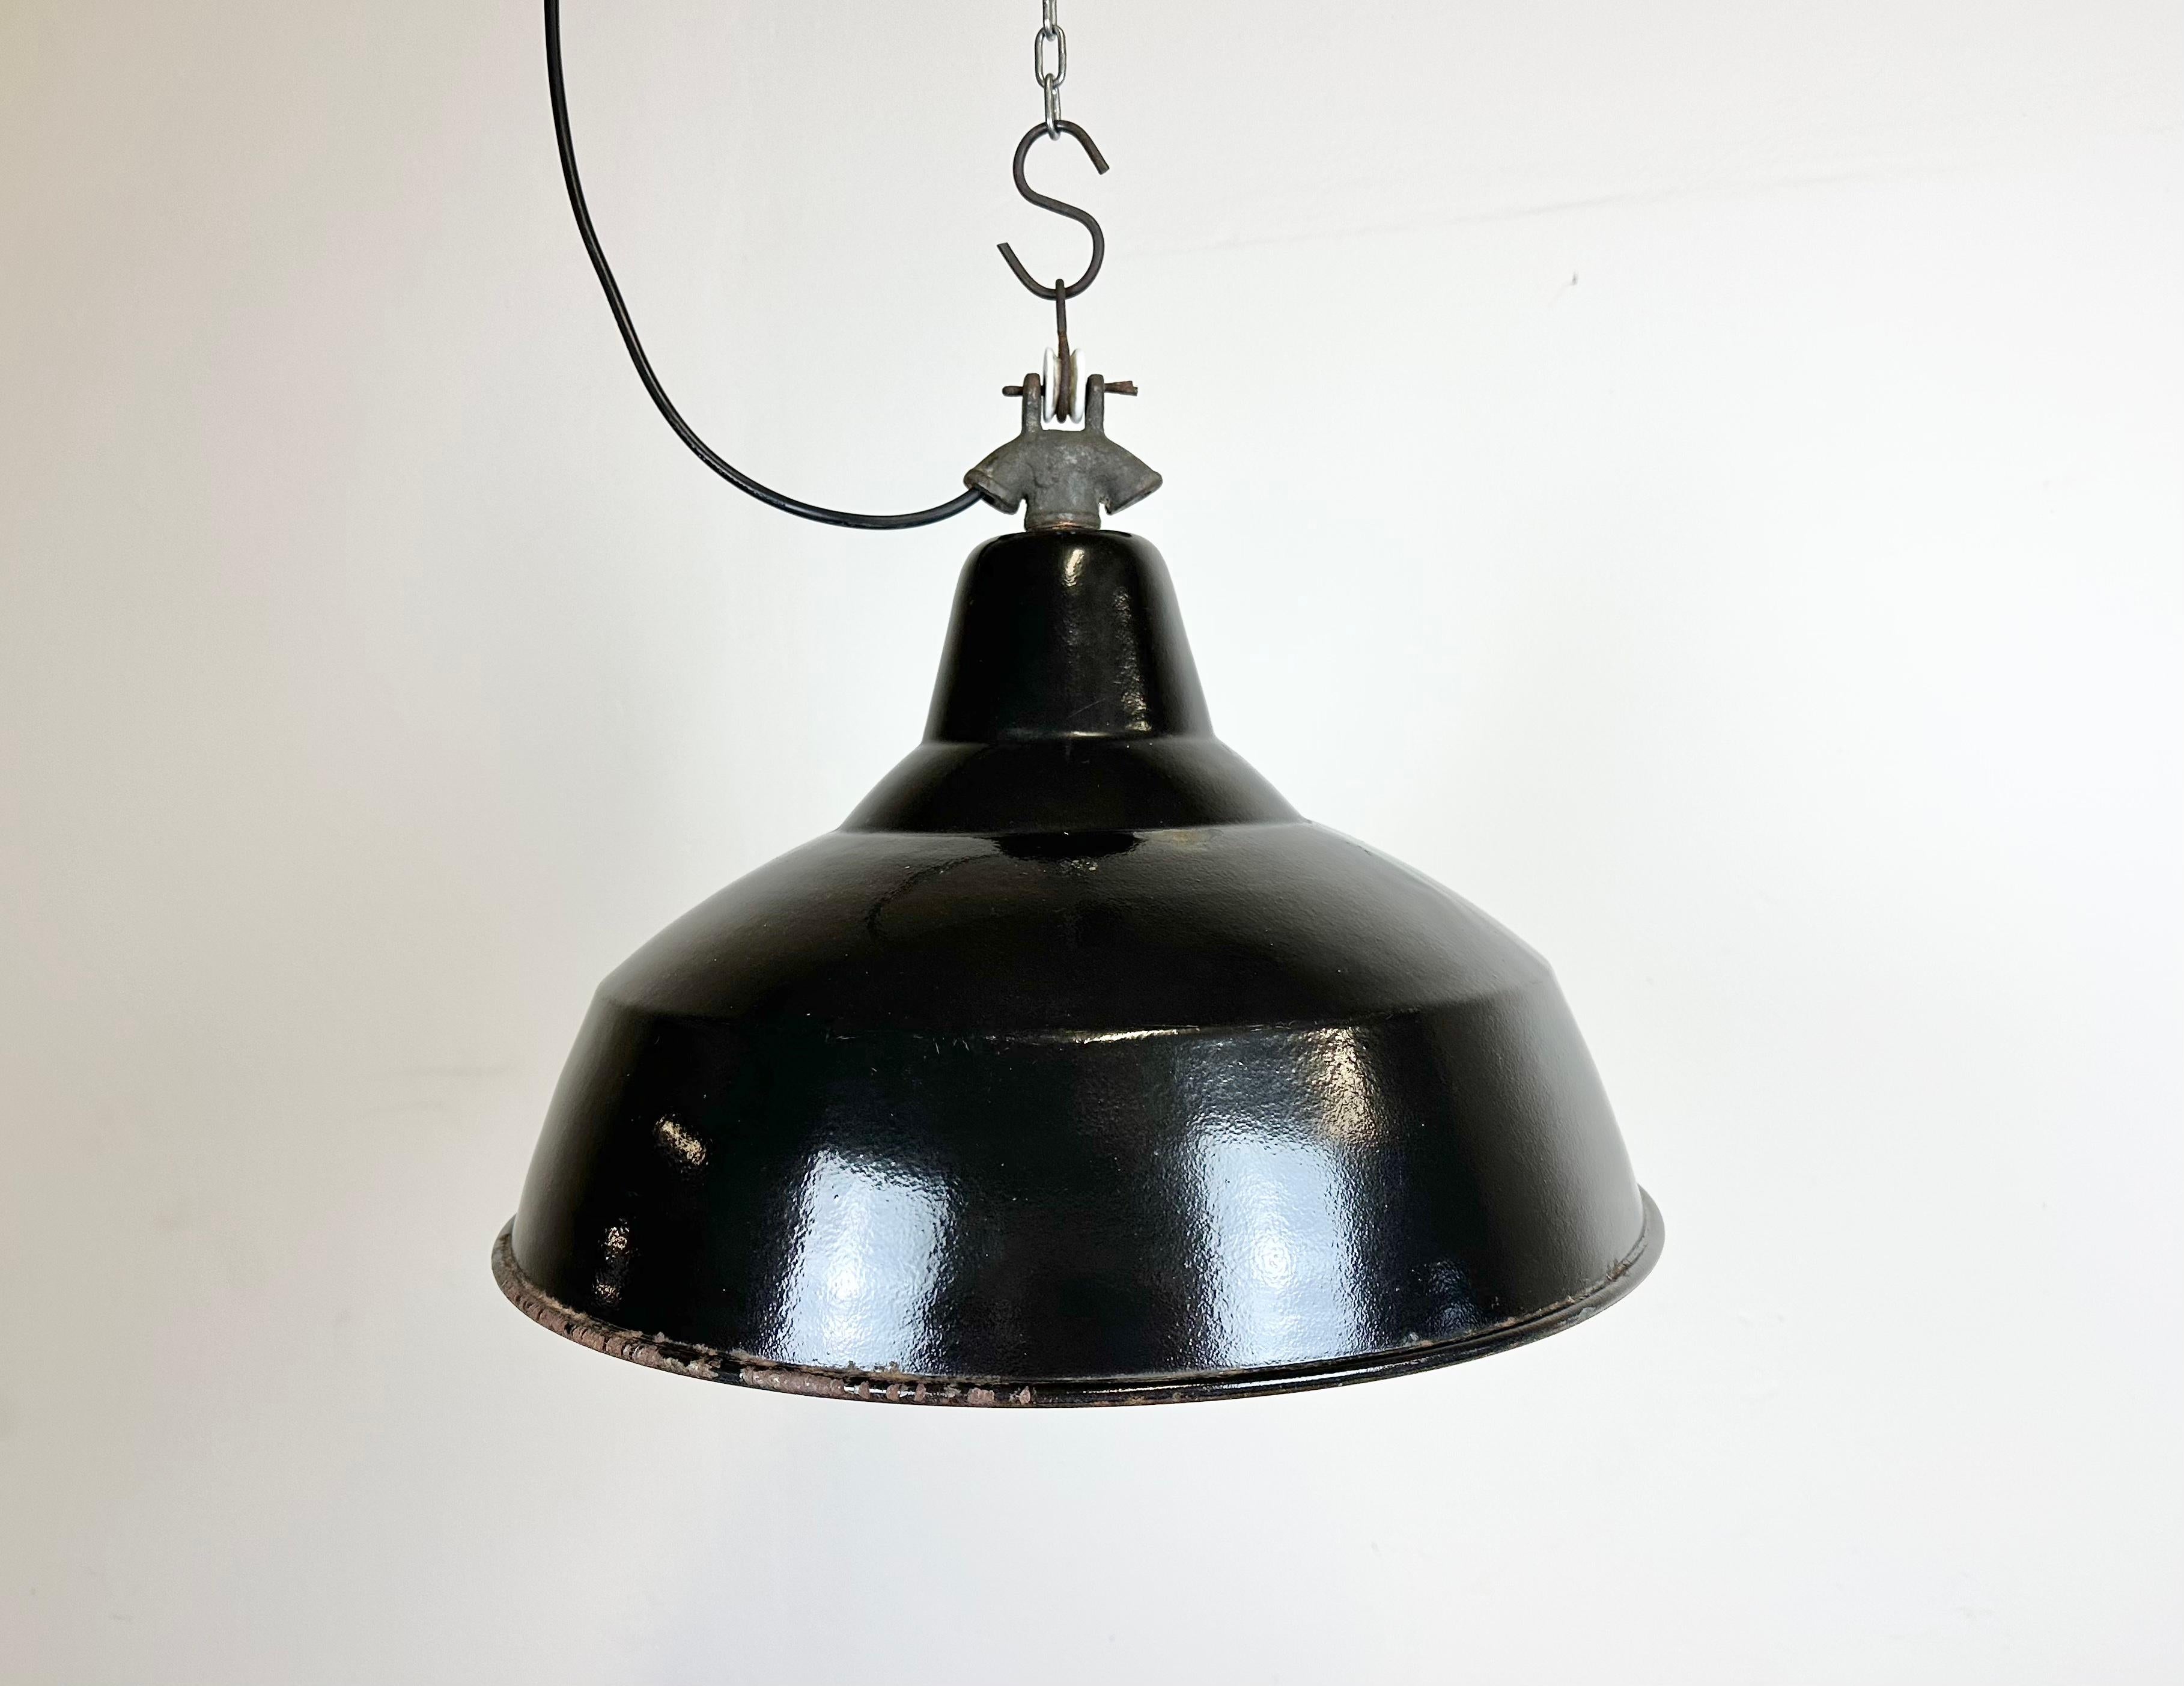 Industrial black enamel pendant light made in former Czechoslovakia during the 1950s. White enamel inside the shade. Cast iron top. The porcelain socket requires E 27/ E26 light bulbs. New wire. Fully functional. The weight of the lamp is 1.8 kg.